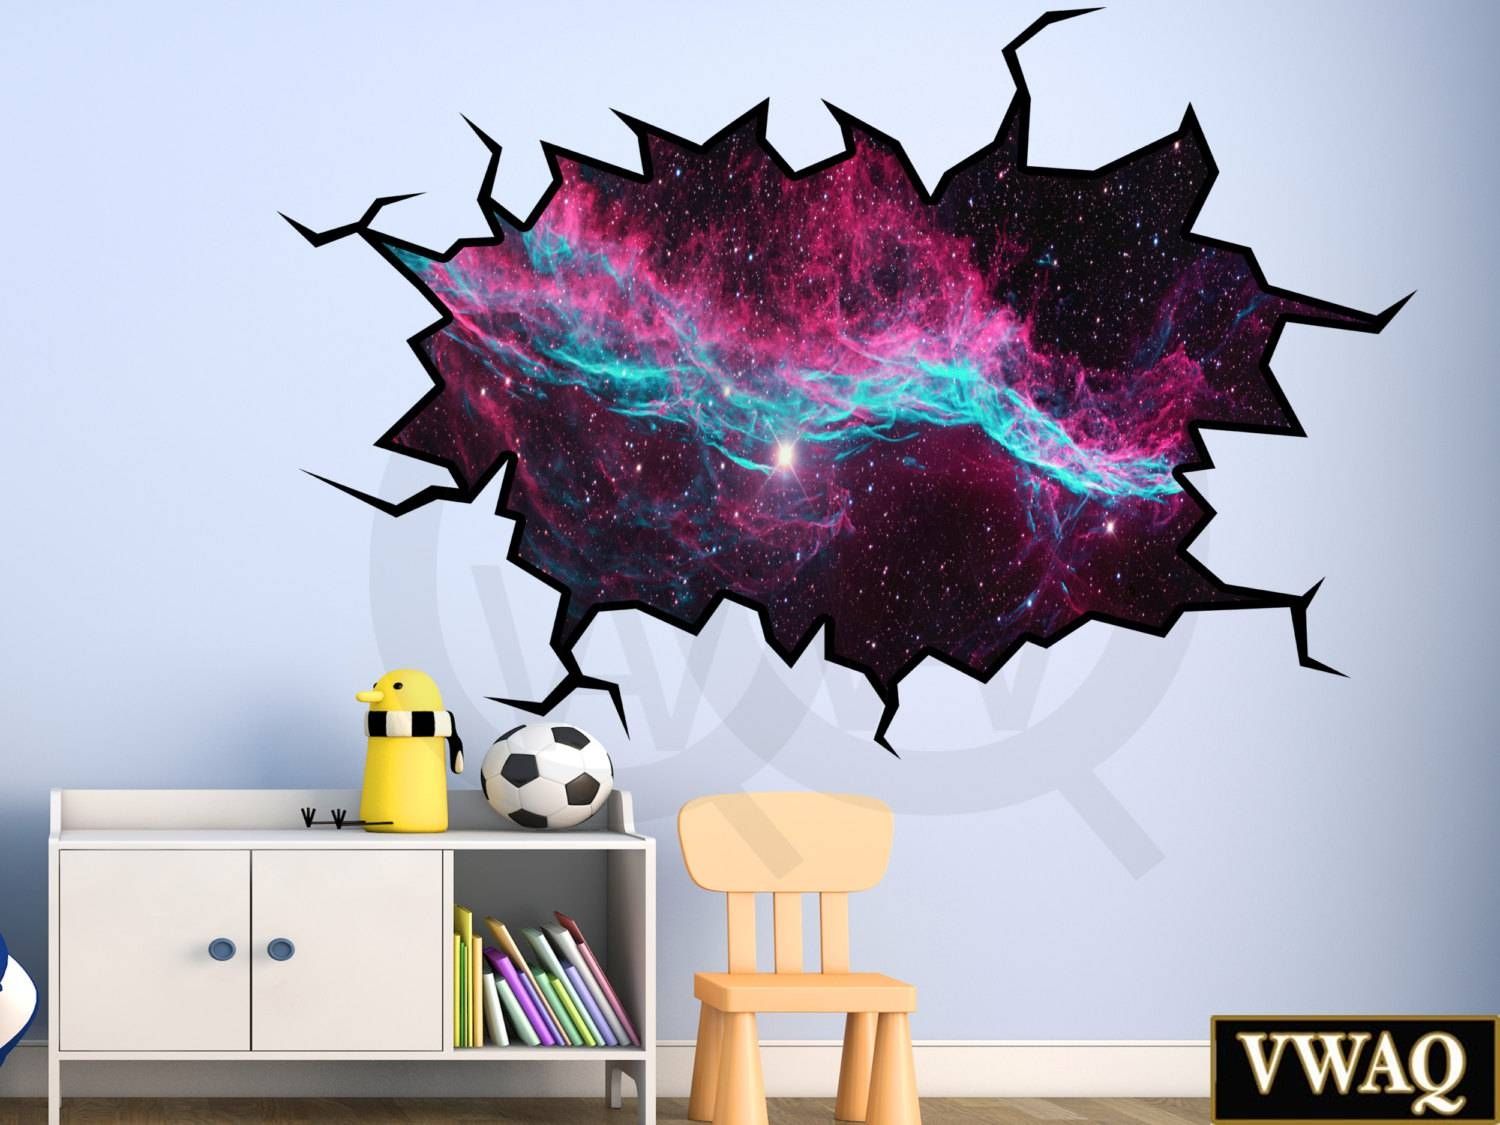 3d Wall Art Outer Space 3d Galaxy Wall Decor Vinyl Wall In Best And Newest Space 3d Vinyl Wall Art (View 2 of 20)